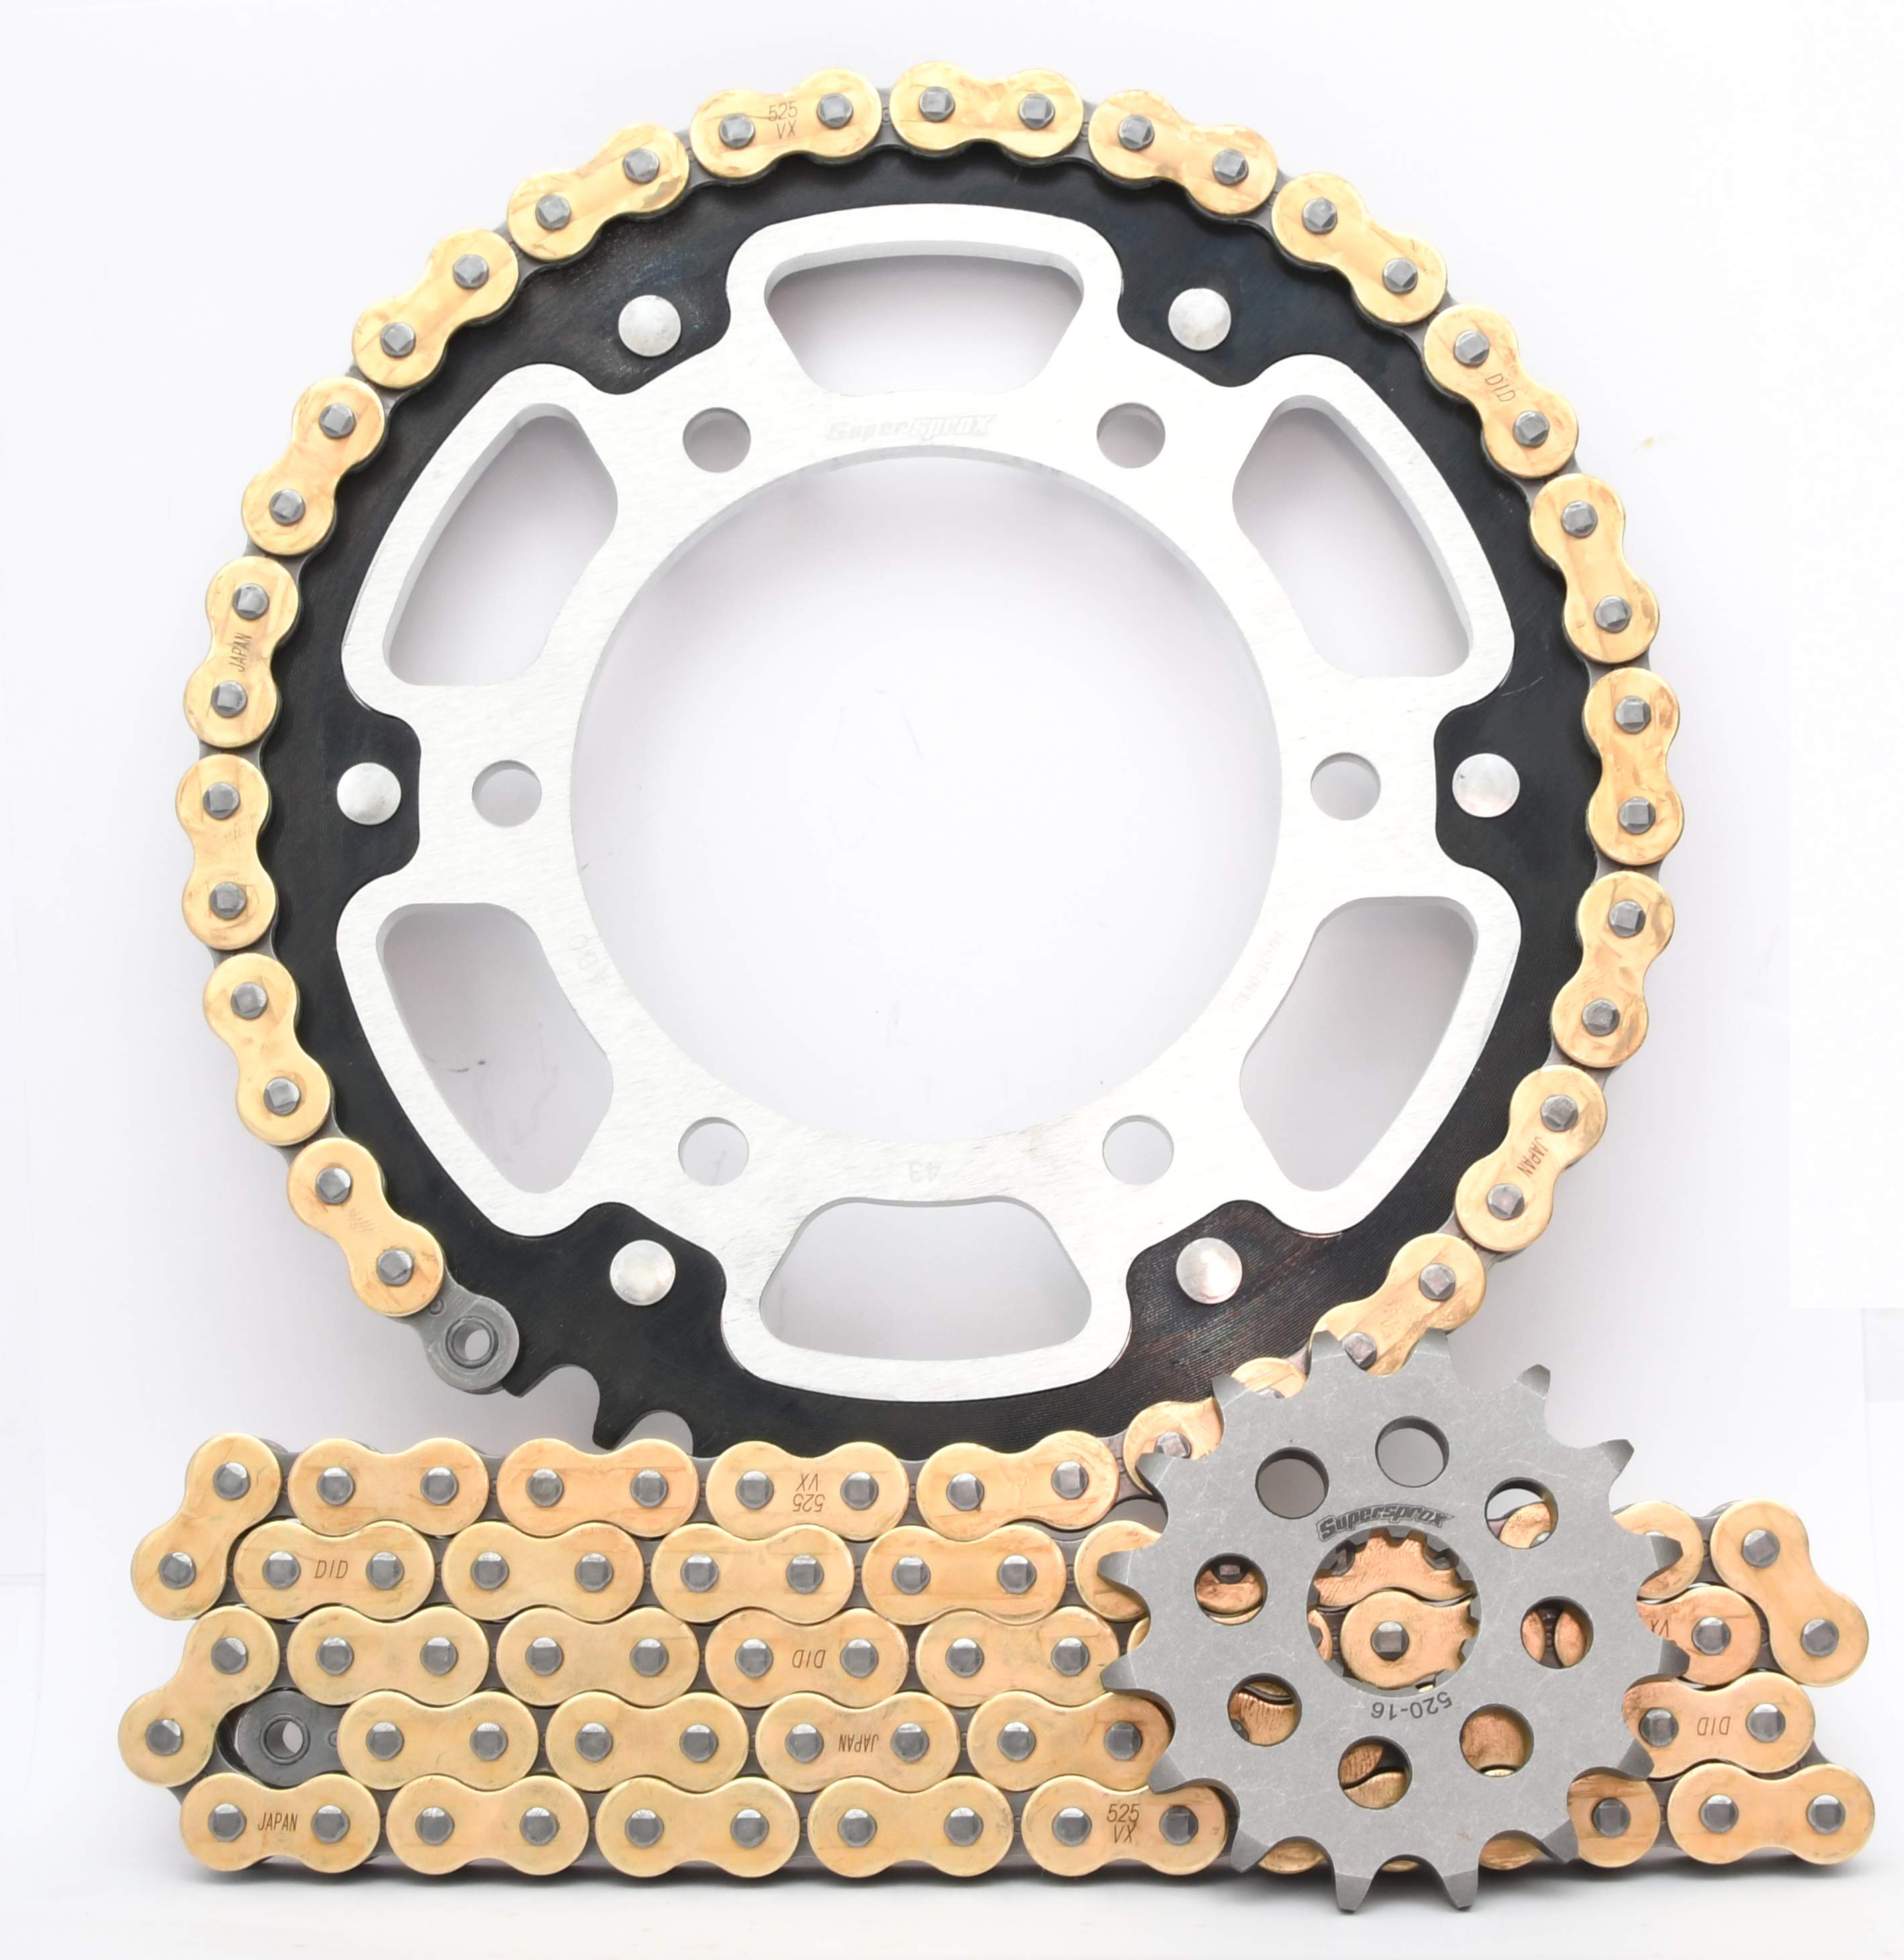 Supersprox Chain & Sprocket Kit for Yamaha MT-07 14> - Choose Your Gearing